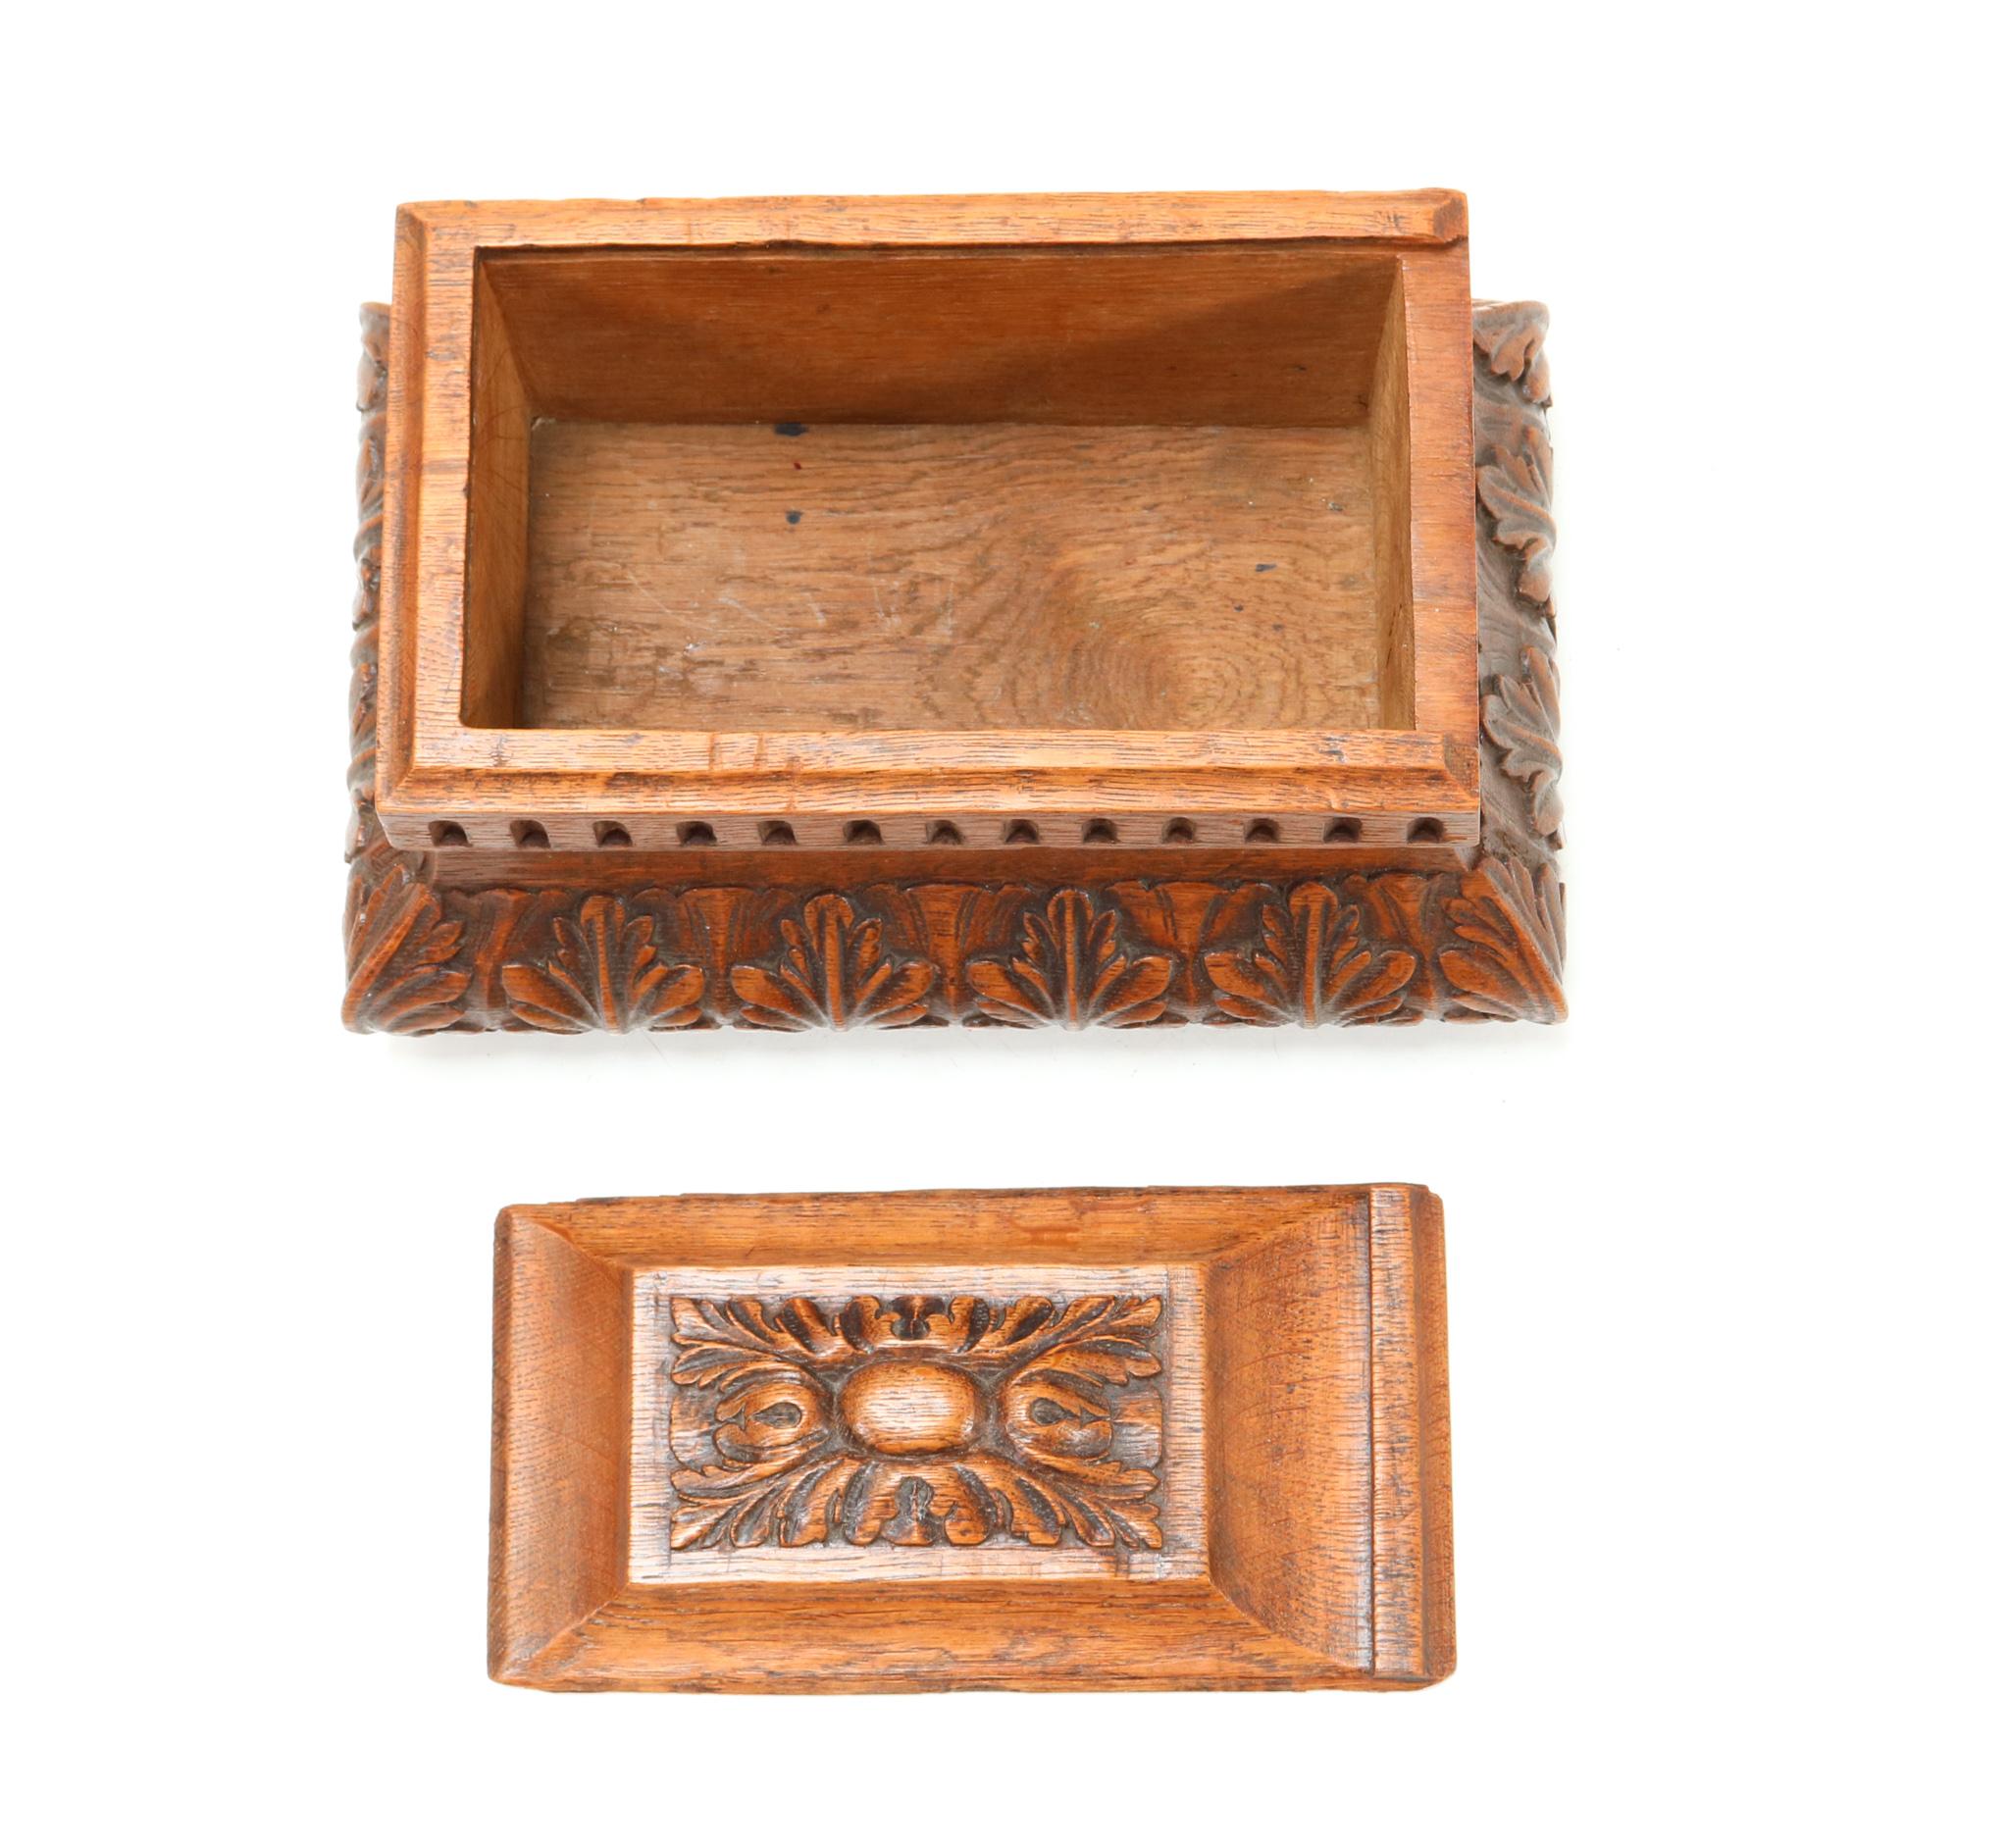 Stunning and rare Antique decorative box.
Striking Dutch design from the 19th century.
Solid oak with nicely hand-carved elements.
The original top of the box slides off.
This wonderful Antique decorative box is in good original condition.
with